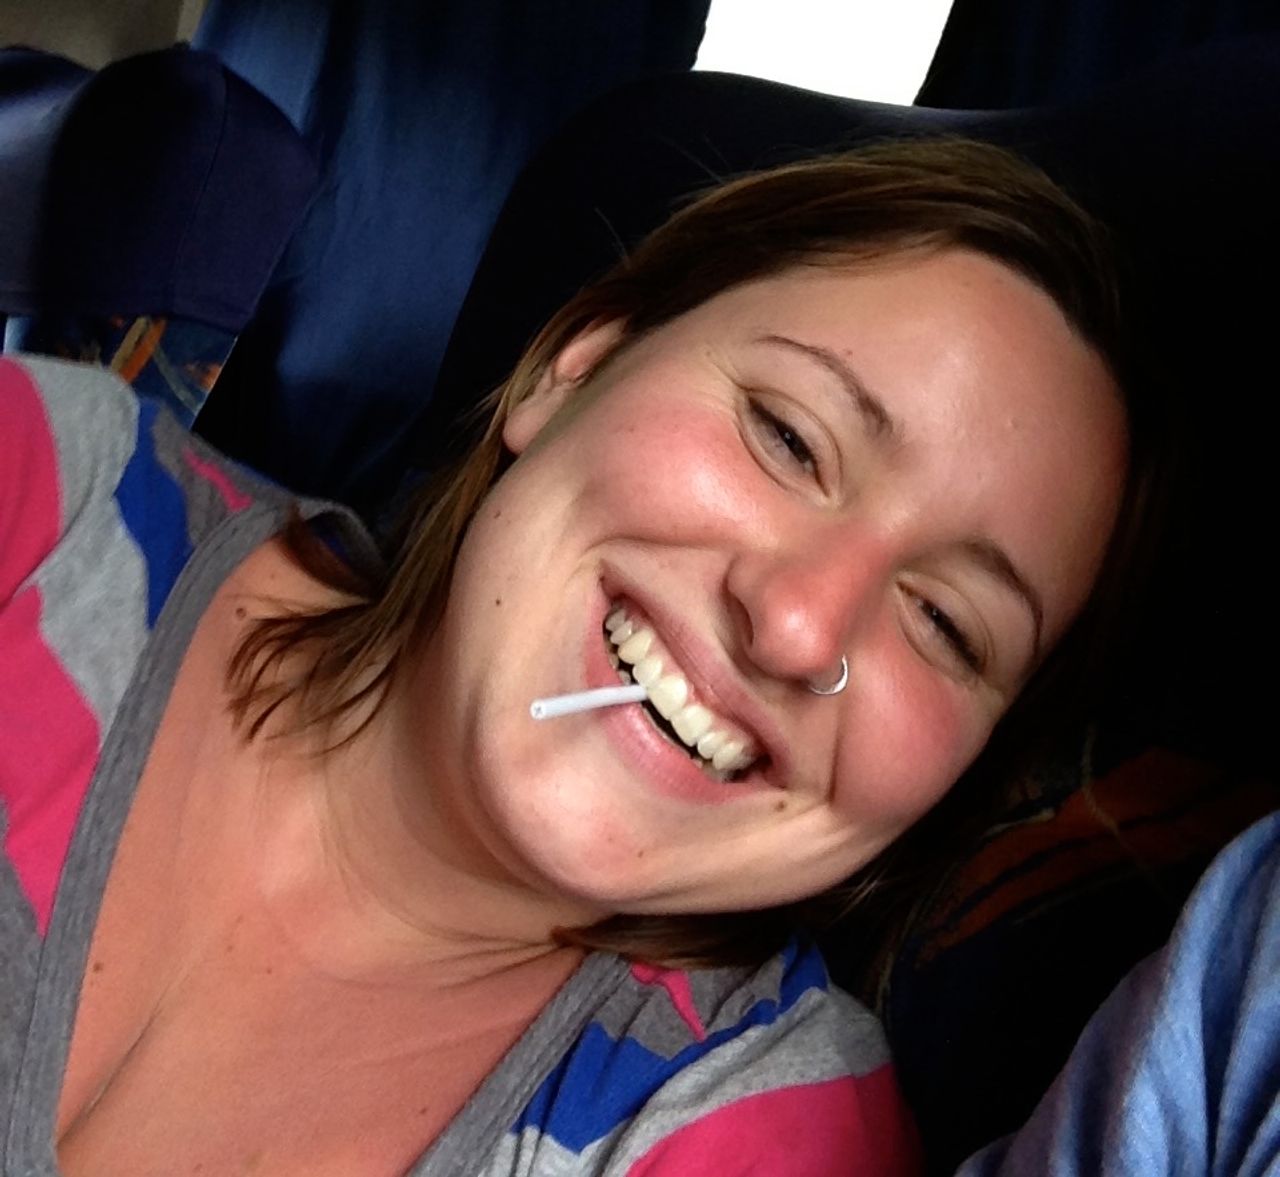 A woman smiling with a lollipop stick in her mouth.